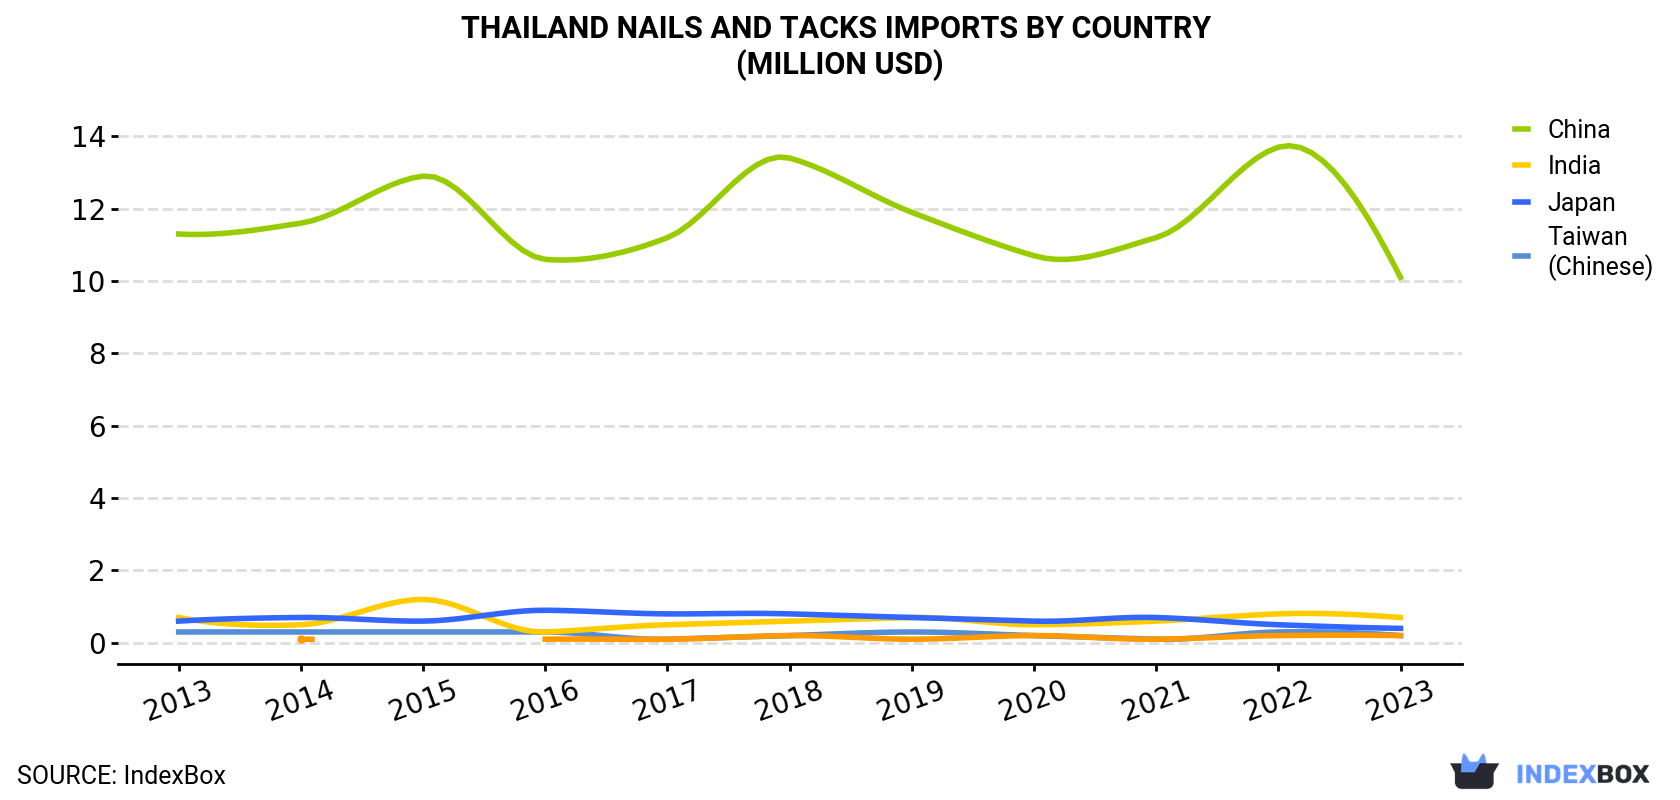 Thailand Nails And Tacks Imports By Country (Million USD)